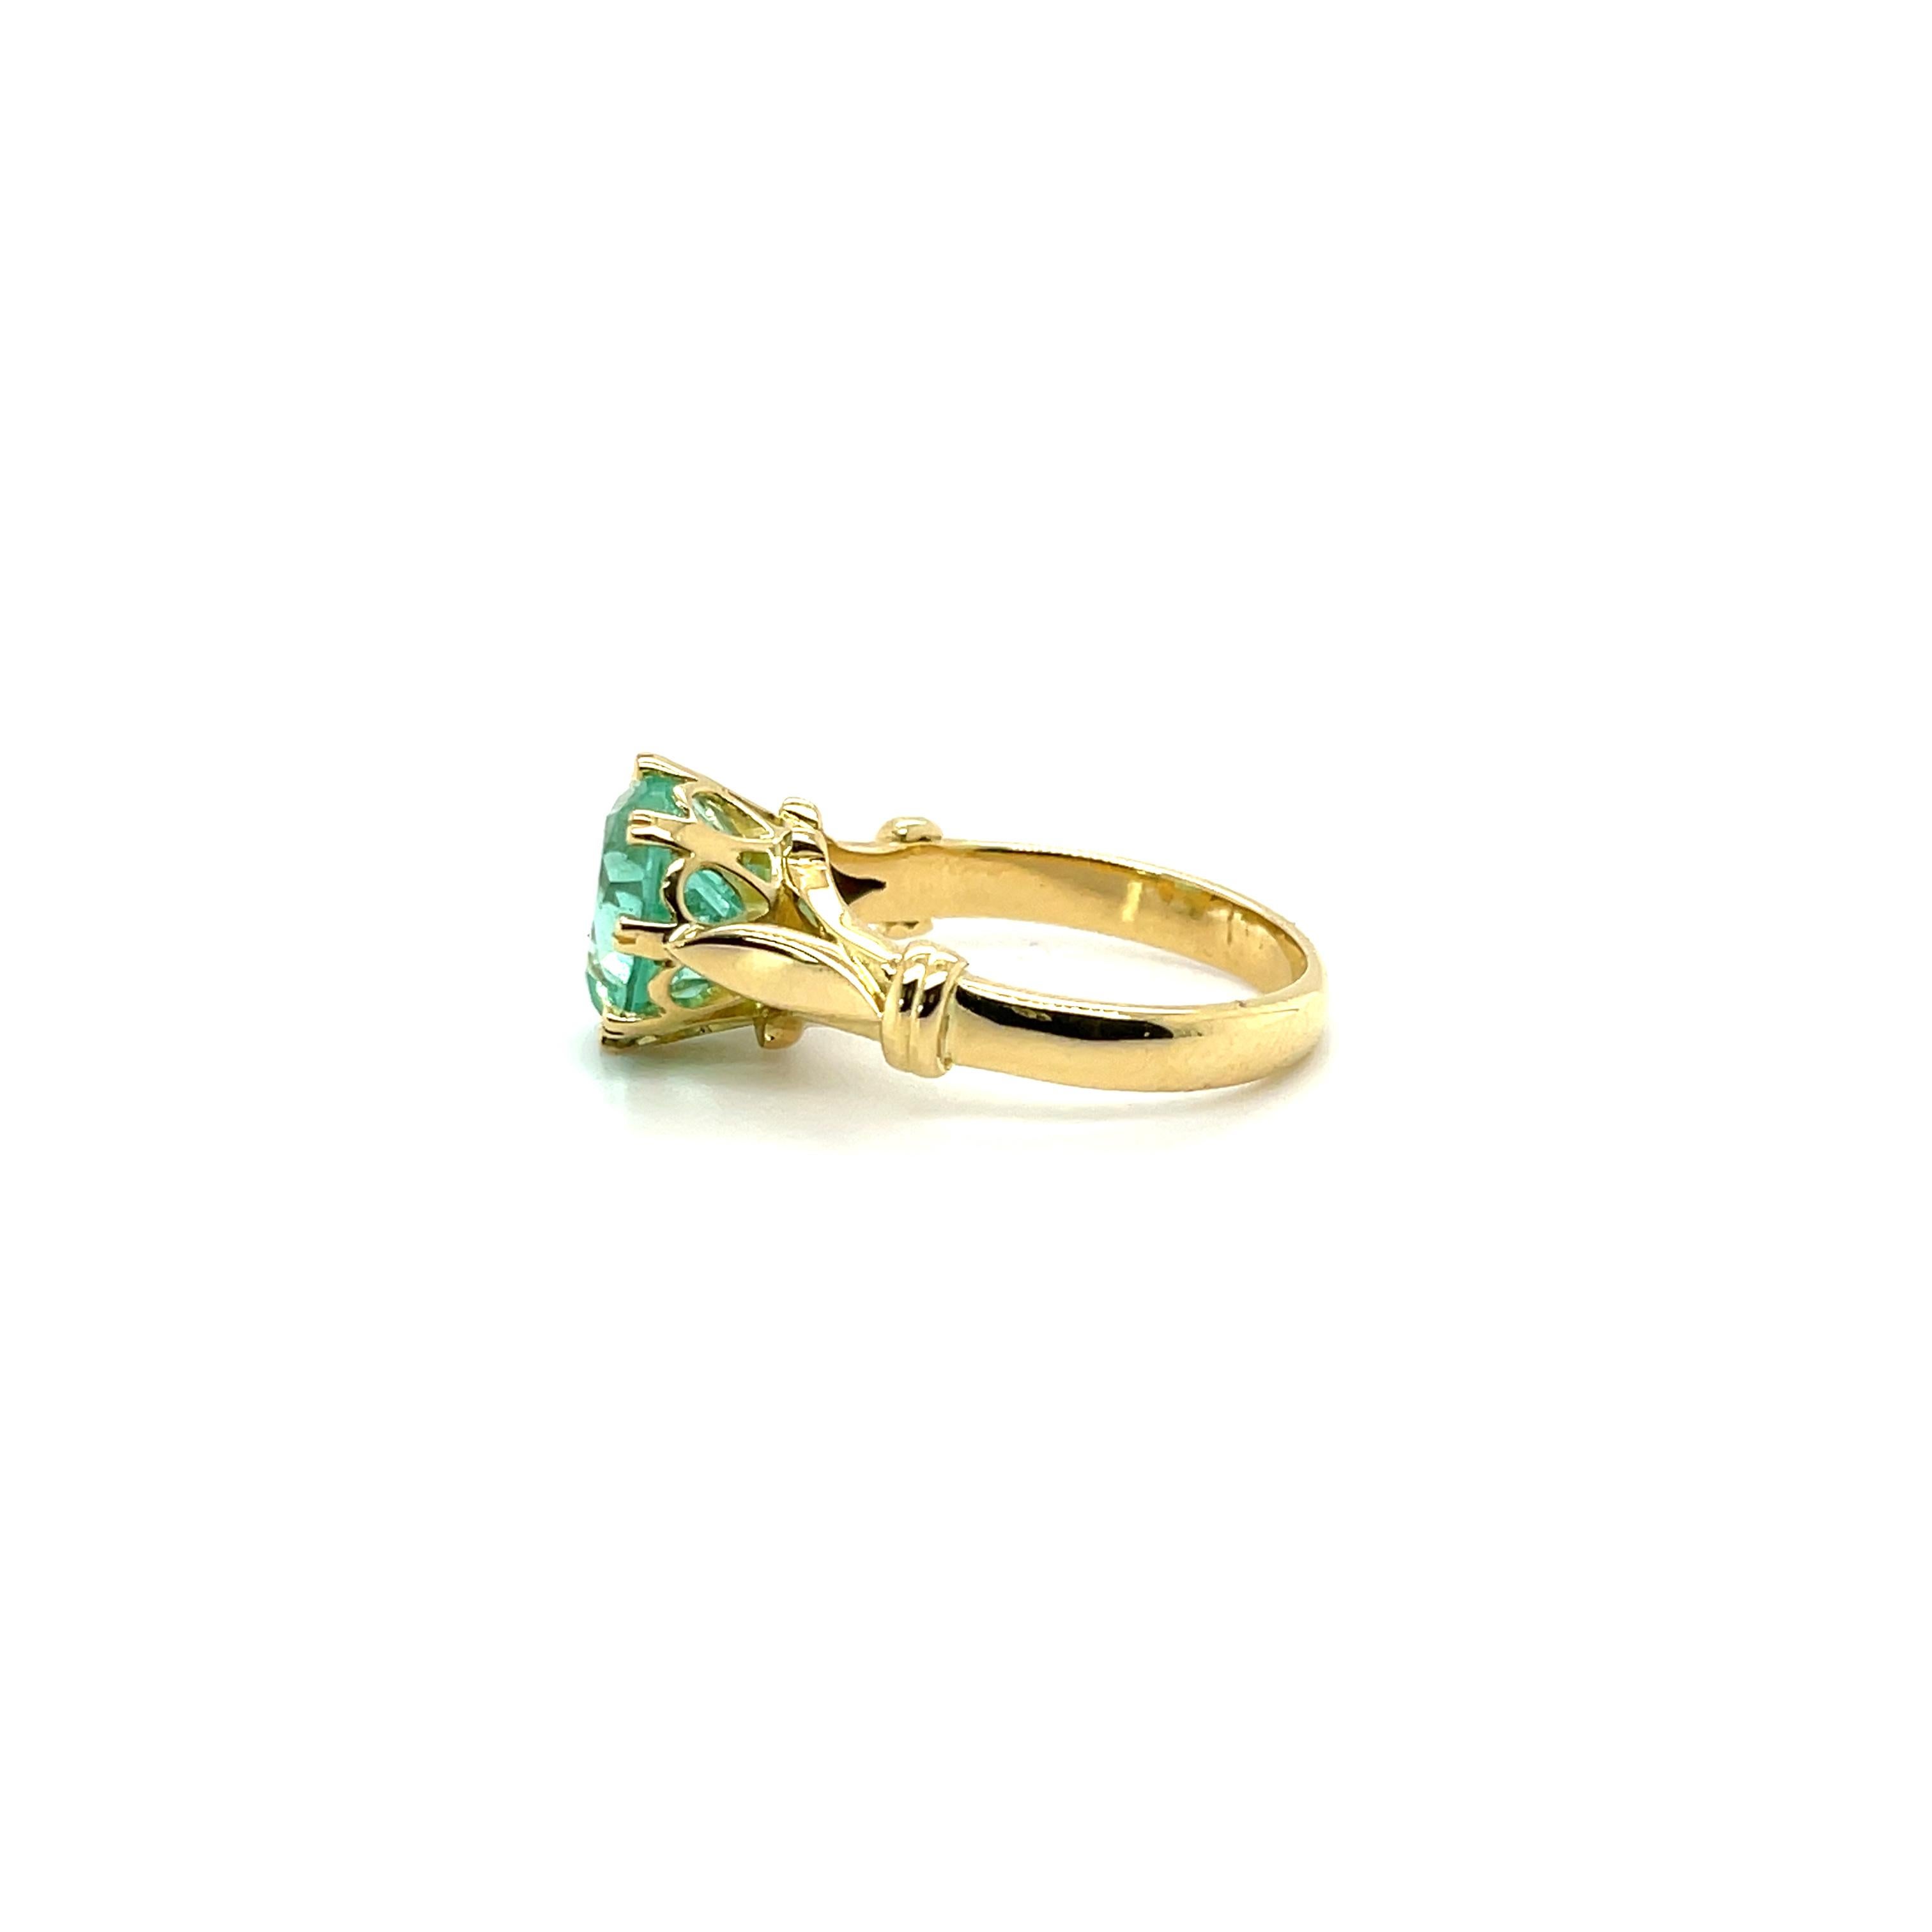 Gorgeous Colombian Emerald solitaire ring, crafted in eighteen karat yellow gold , complimented by a stunning polished finish design. 


One ladies - 18ct yellow gold dress ring, narrow, half round shank with underrail, leaf-
shaped shoulders,